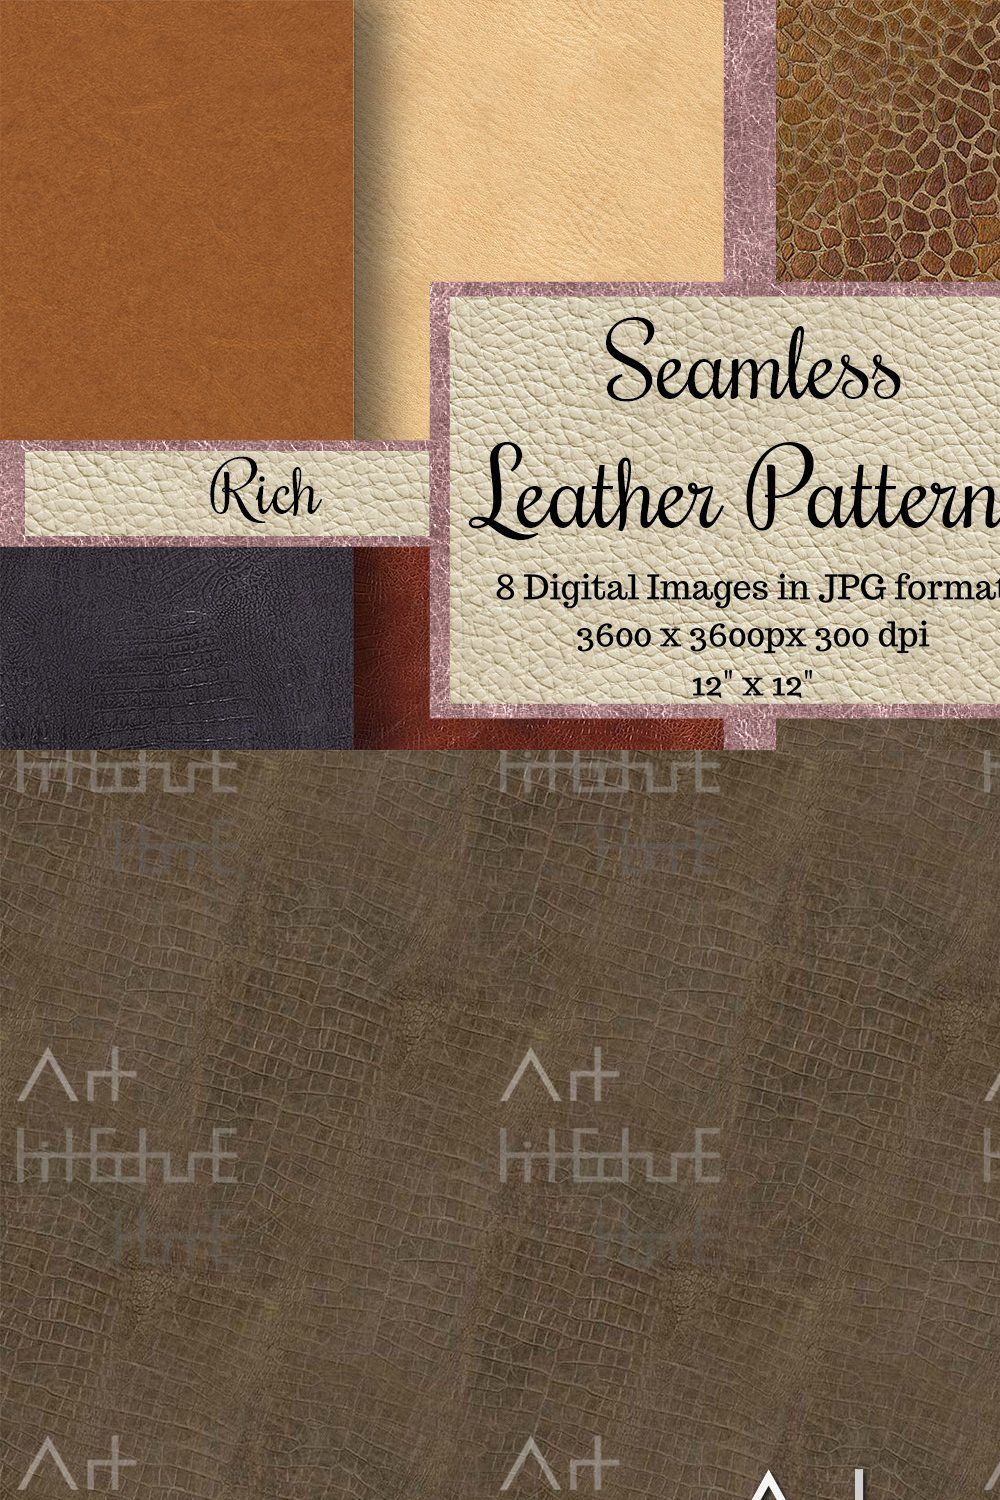 Seamless Leather Patterns Rich Pack pinterest preview image.